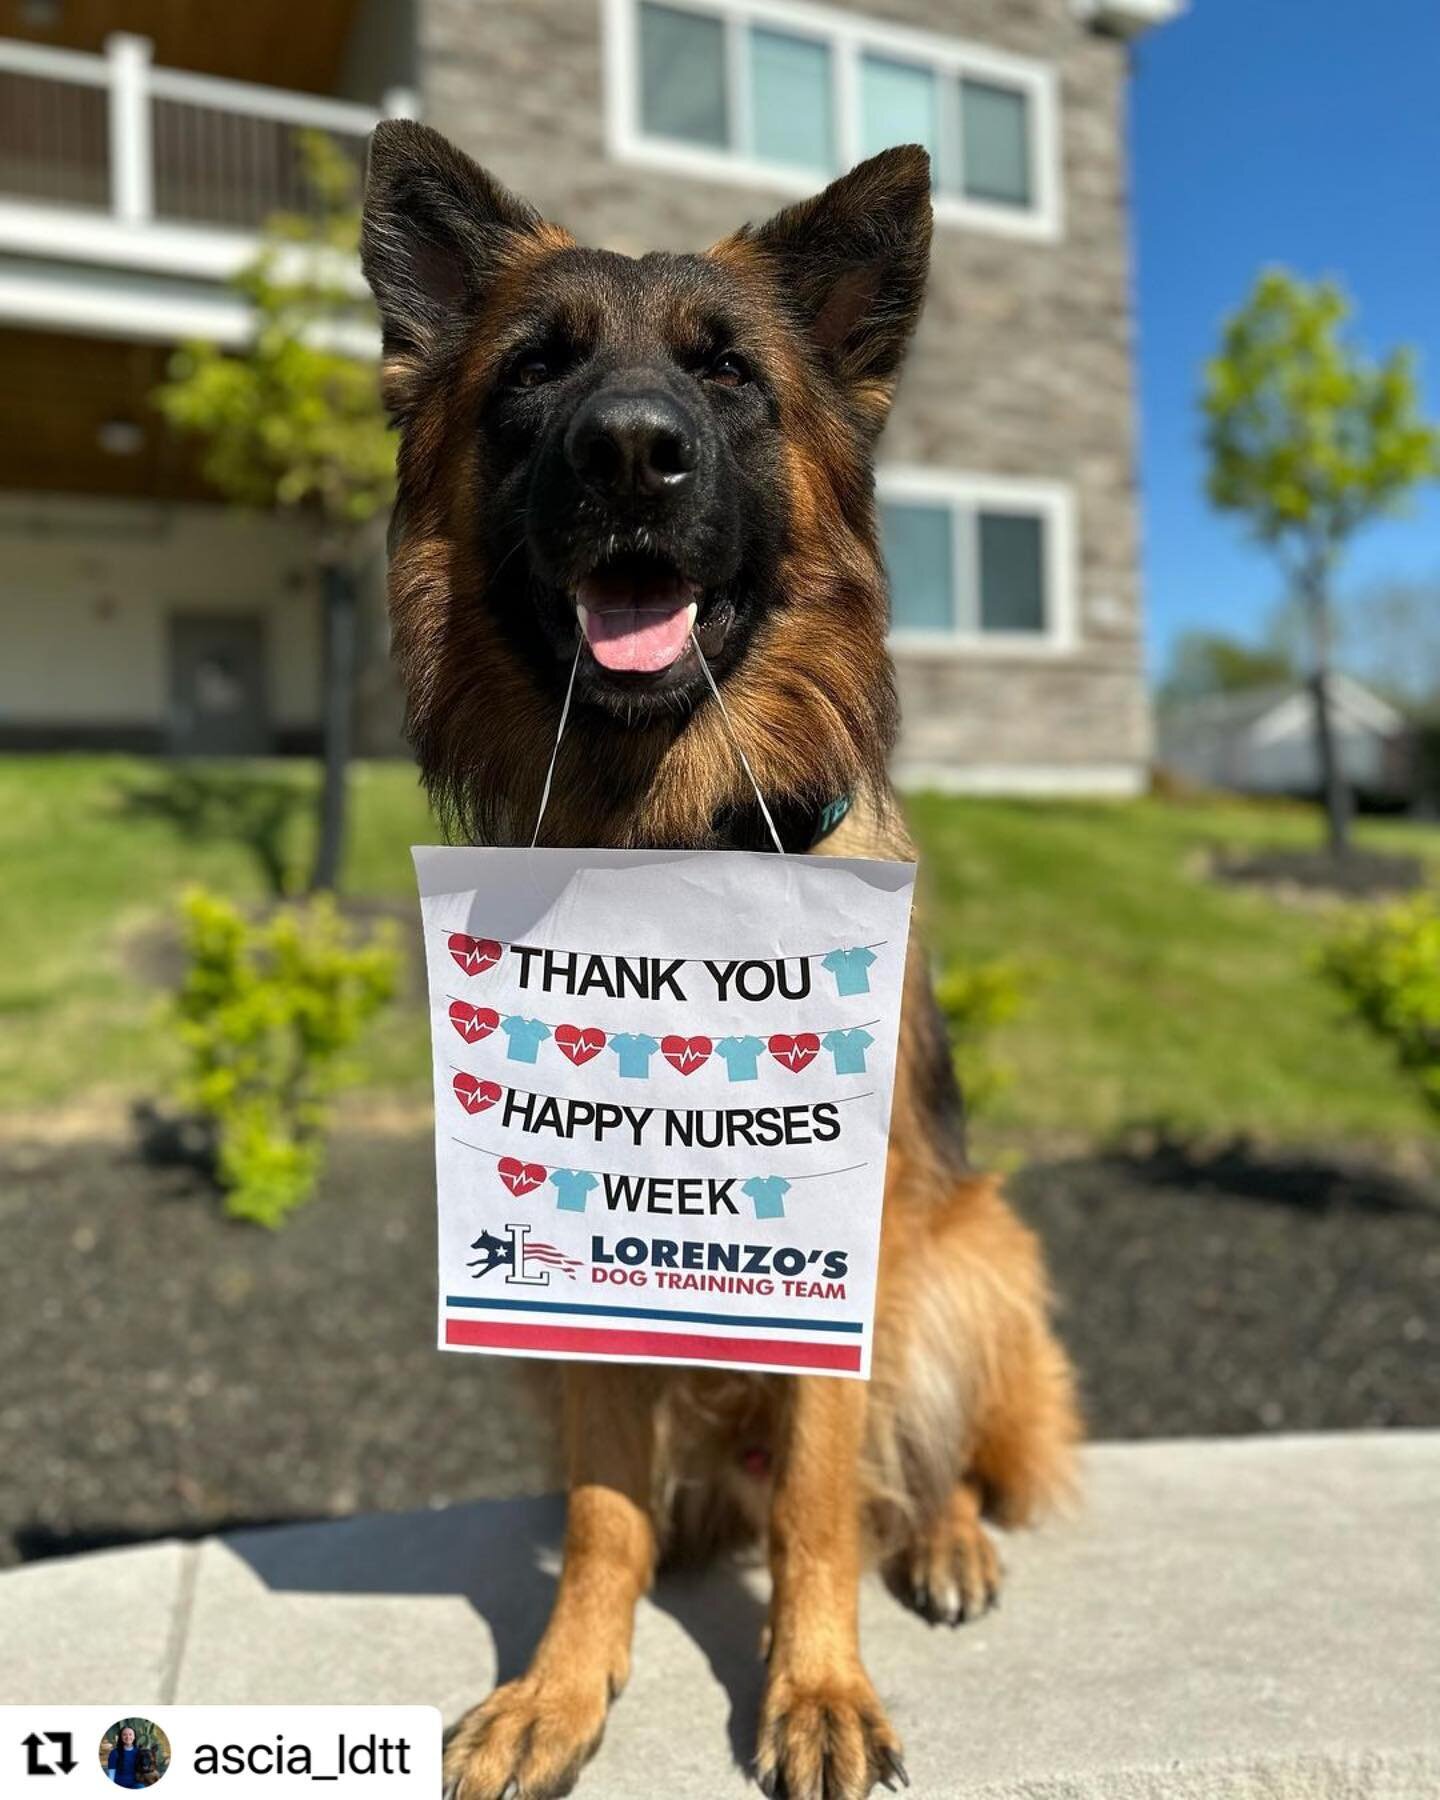 Happy Nurses Week 🩺 From Lorenzo&rsquo;s Dog Training Team and @maverick_ldtt ❤️ Thank you for all you do! 

#Repost @ascia_ldtt

#lorenzosdogtrainingteam #lorenzosdogtraining #lorenzos #professionaldogtrainer #professionaldogtraining #professional 